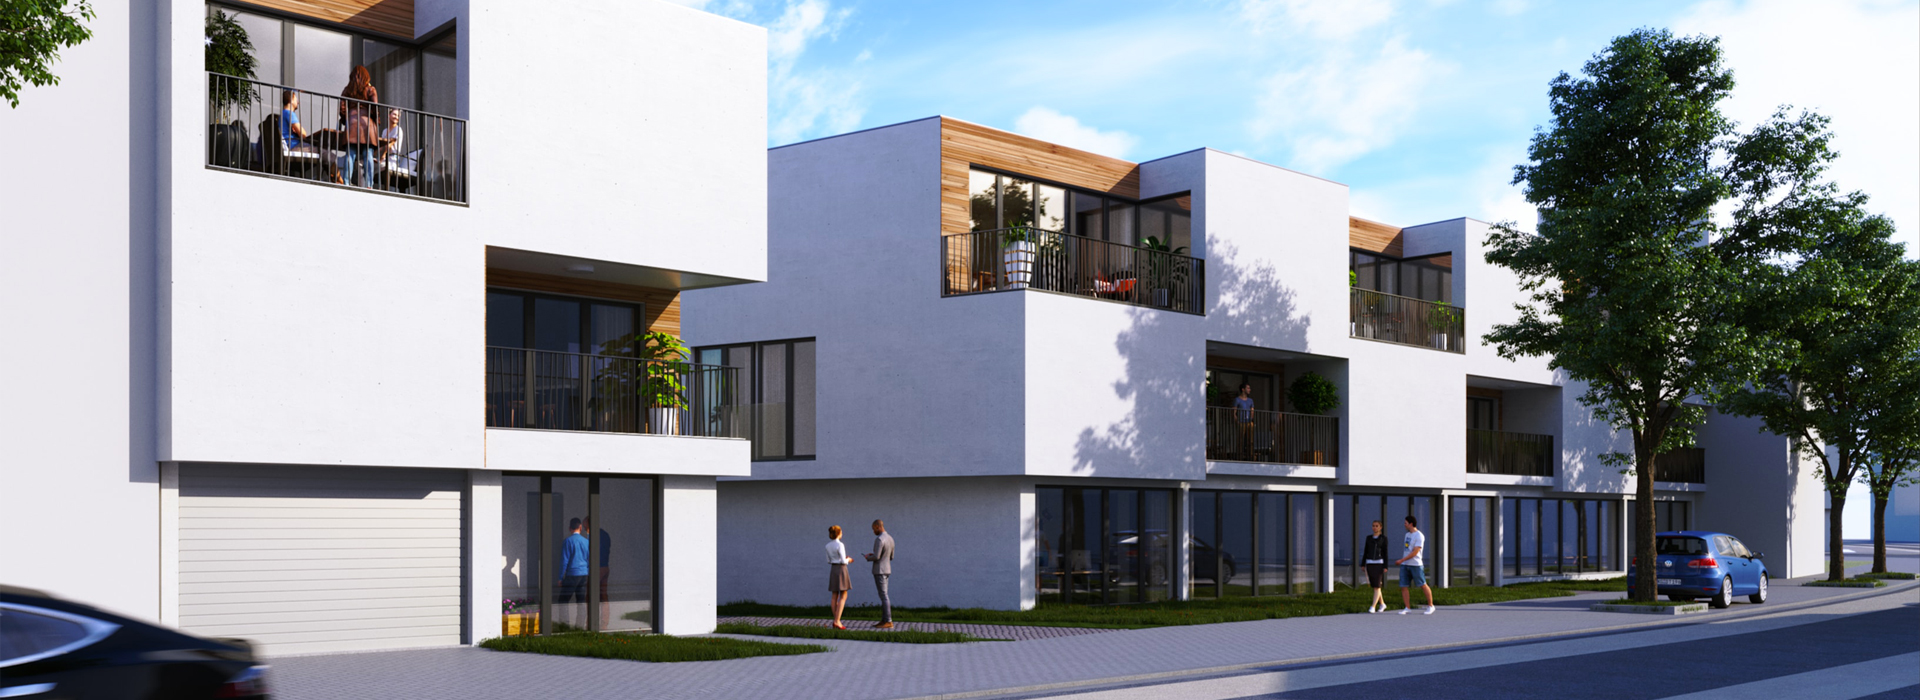 Bliss projet immobilier